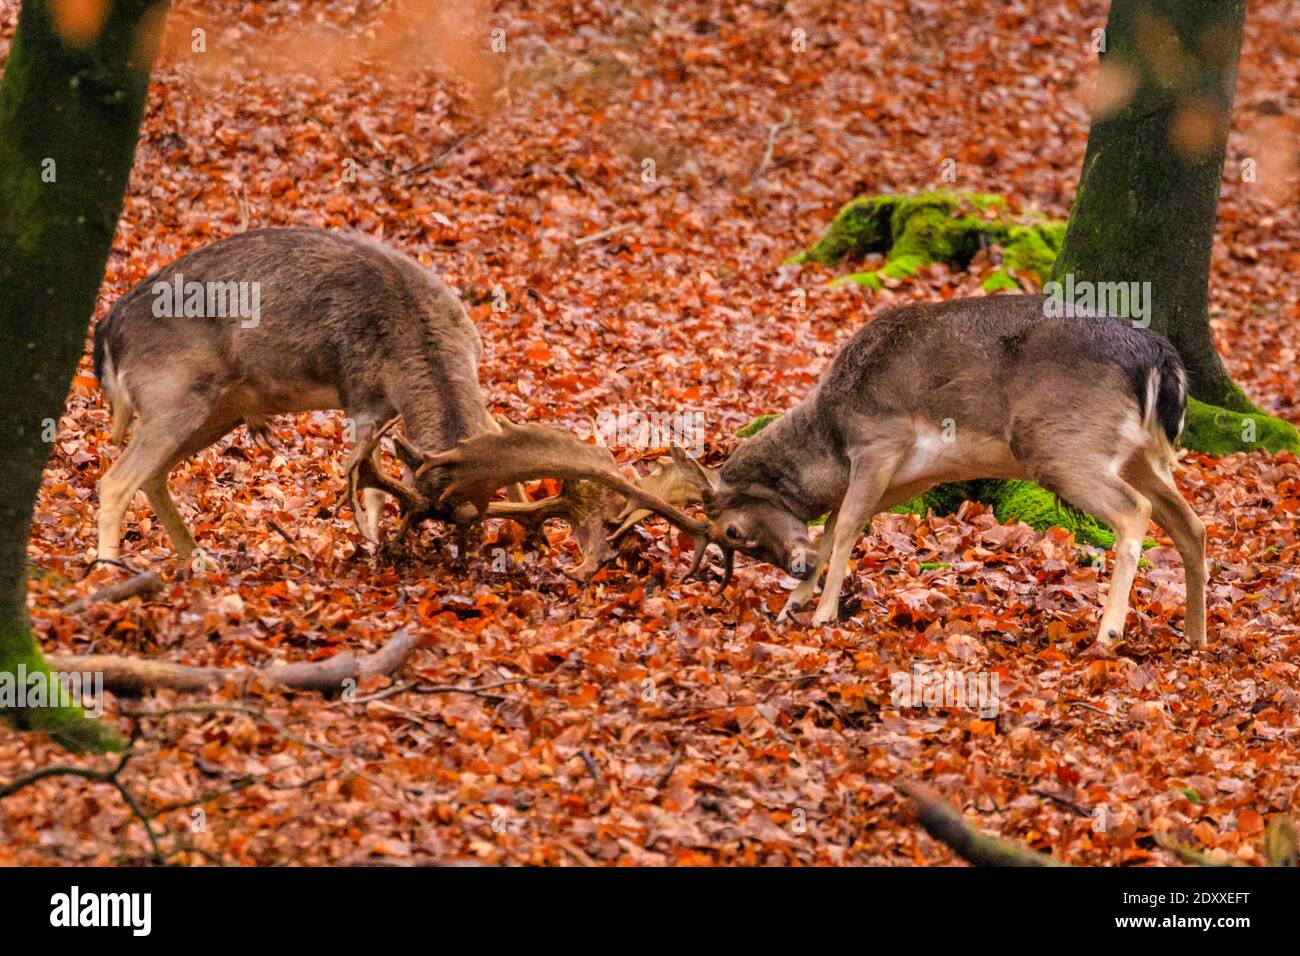 Duelmen, NRW, Germany. 24th Dec, 2020. Christmas fight - two young bucks test out their strength by locking antlers. Fallow deer bucks (dama dama) in woodland bring some festive spirit to the Muensterland countryside on a dry but cold Christmas eve. Credit: Imageplotter/Alamy Live News Stock Photo